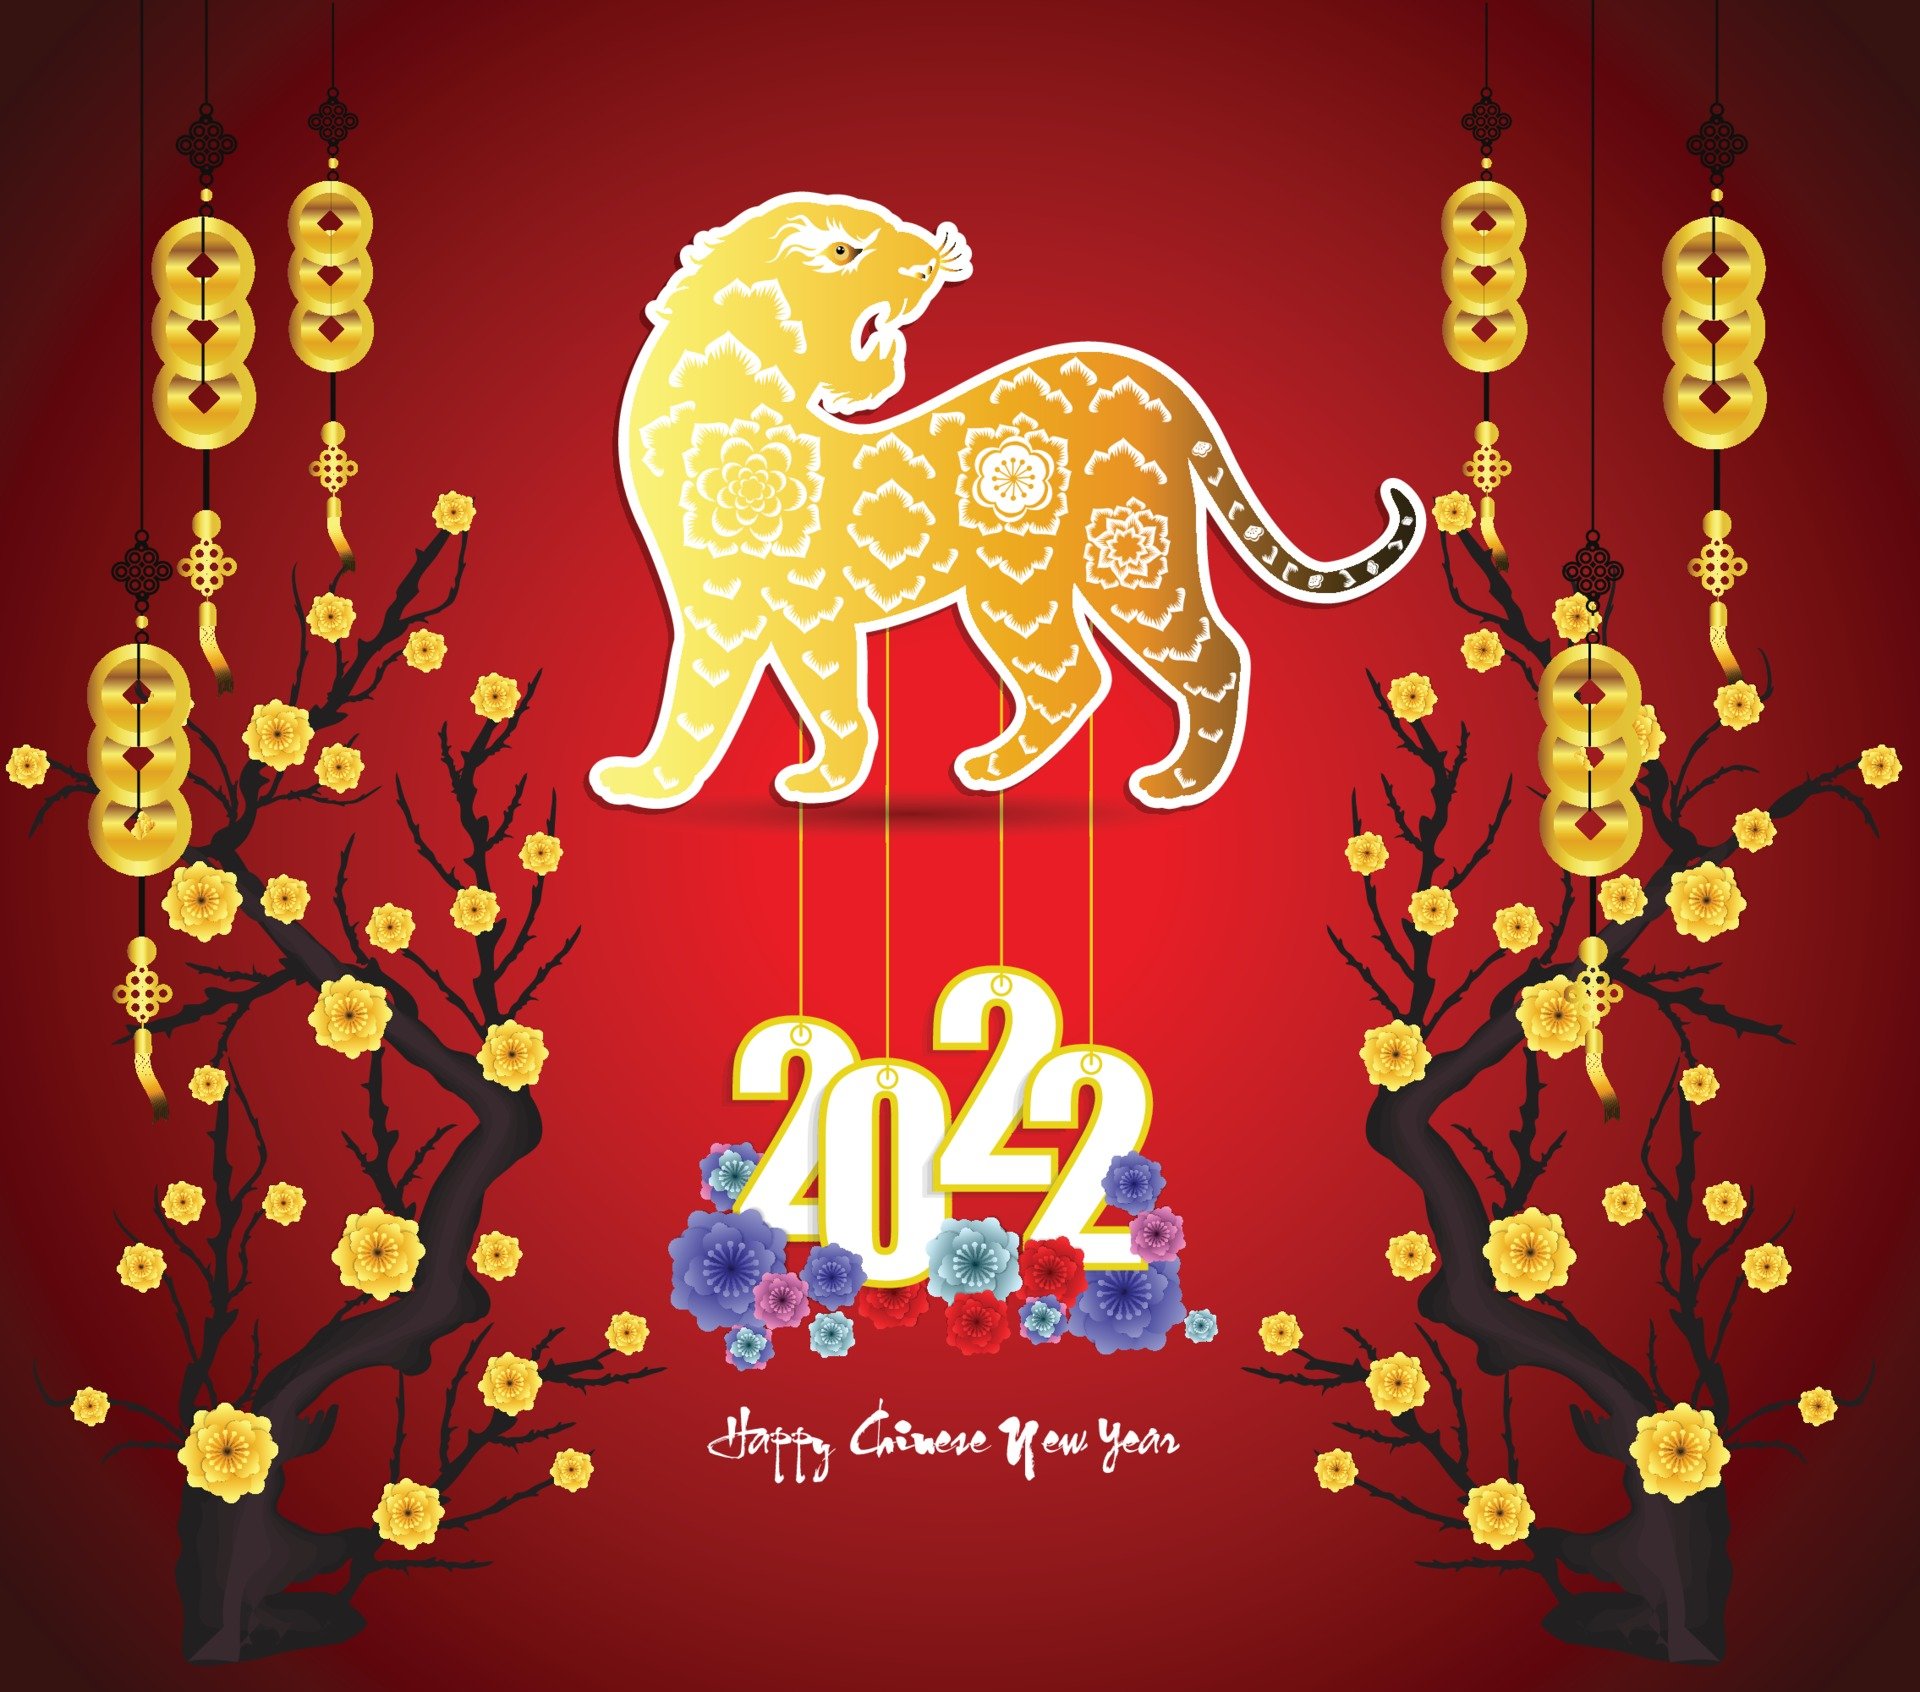 Wallpapers 2022 year of the tiger cat on the desktop